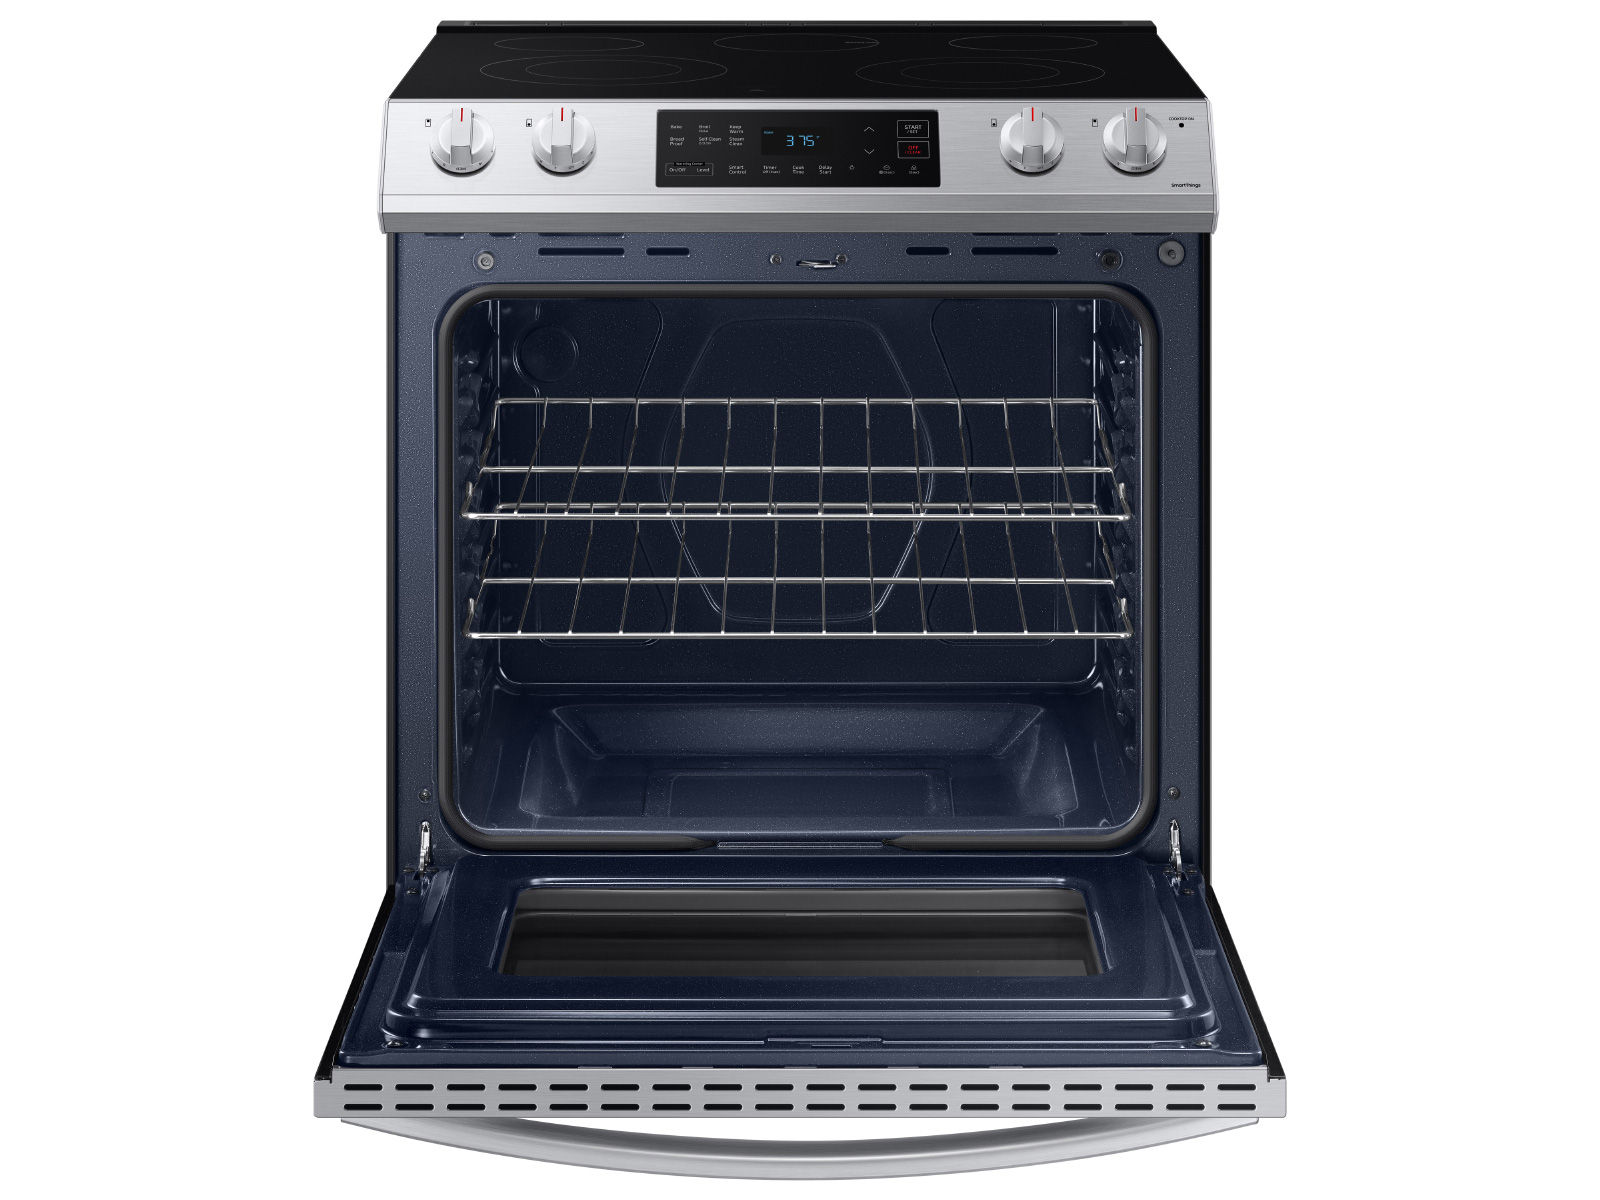 Stove electric slide in stainless steel - appliances - by owner